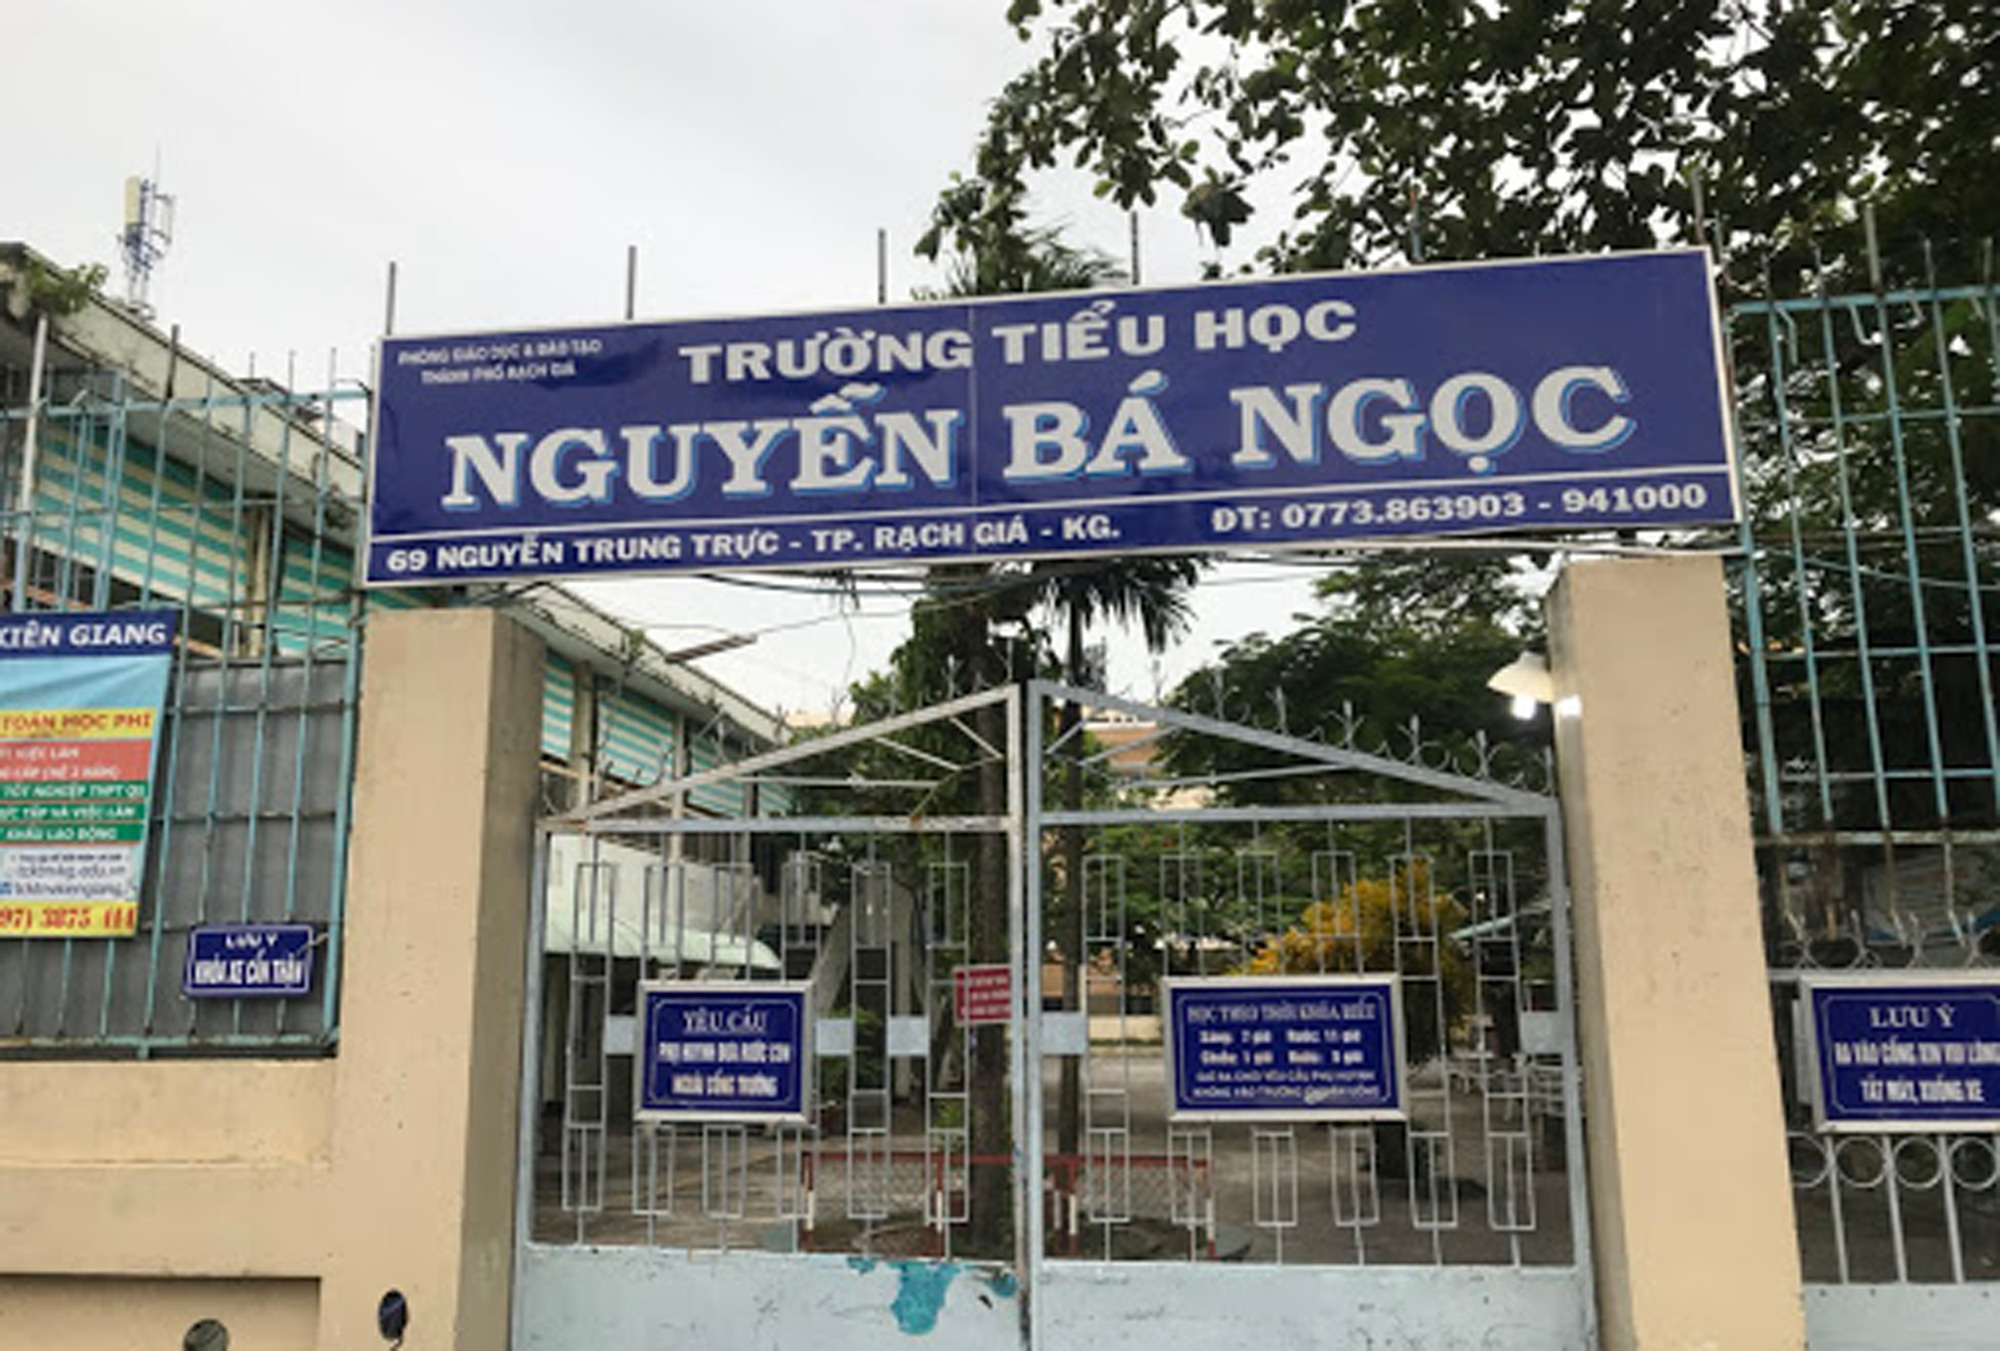 School principal arrested for allegedly misappropriating student fees in Vietnam